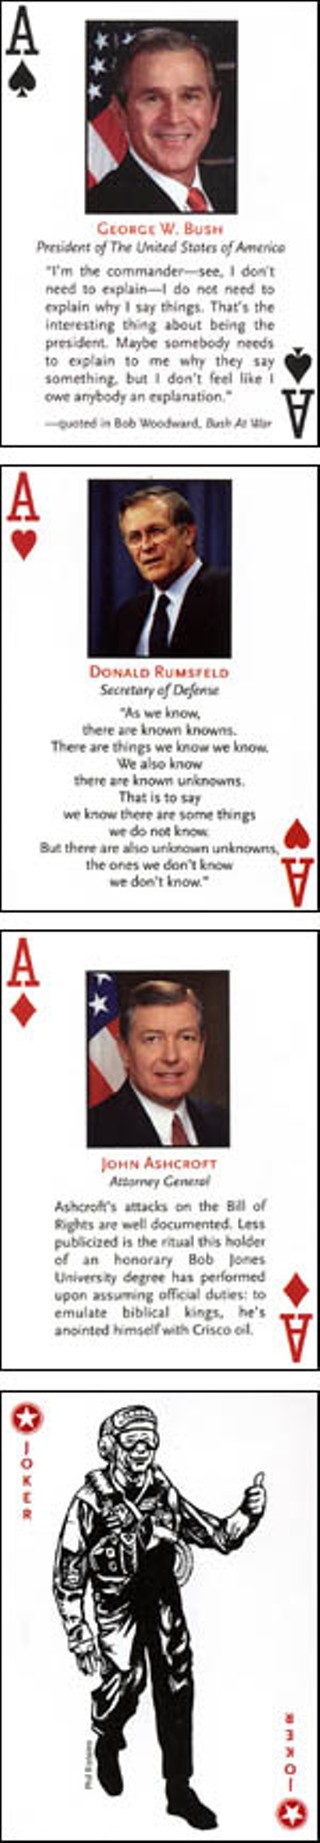 Anyone who thinks George W. Bush is playing without a full deck can be proven wrong at  <a href=http://www.bushcards.com target=blank><b>www.bushcards.com</b></a>, which offers a carefully stacked deck of 52 playing cards (and two jokers, natch) featuring pictures and fun facts of the top dogs in the Bush administration – including aces Bush, Donald Rumsfeld, John Ashcroft, and Dick Big Time Cheney. Fun fact about the veep: Cheney was officially president for 135 minutes while Bush received a colonoscopy.